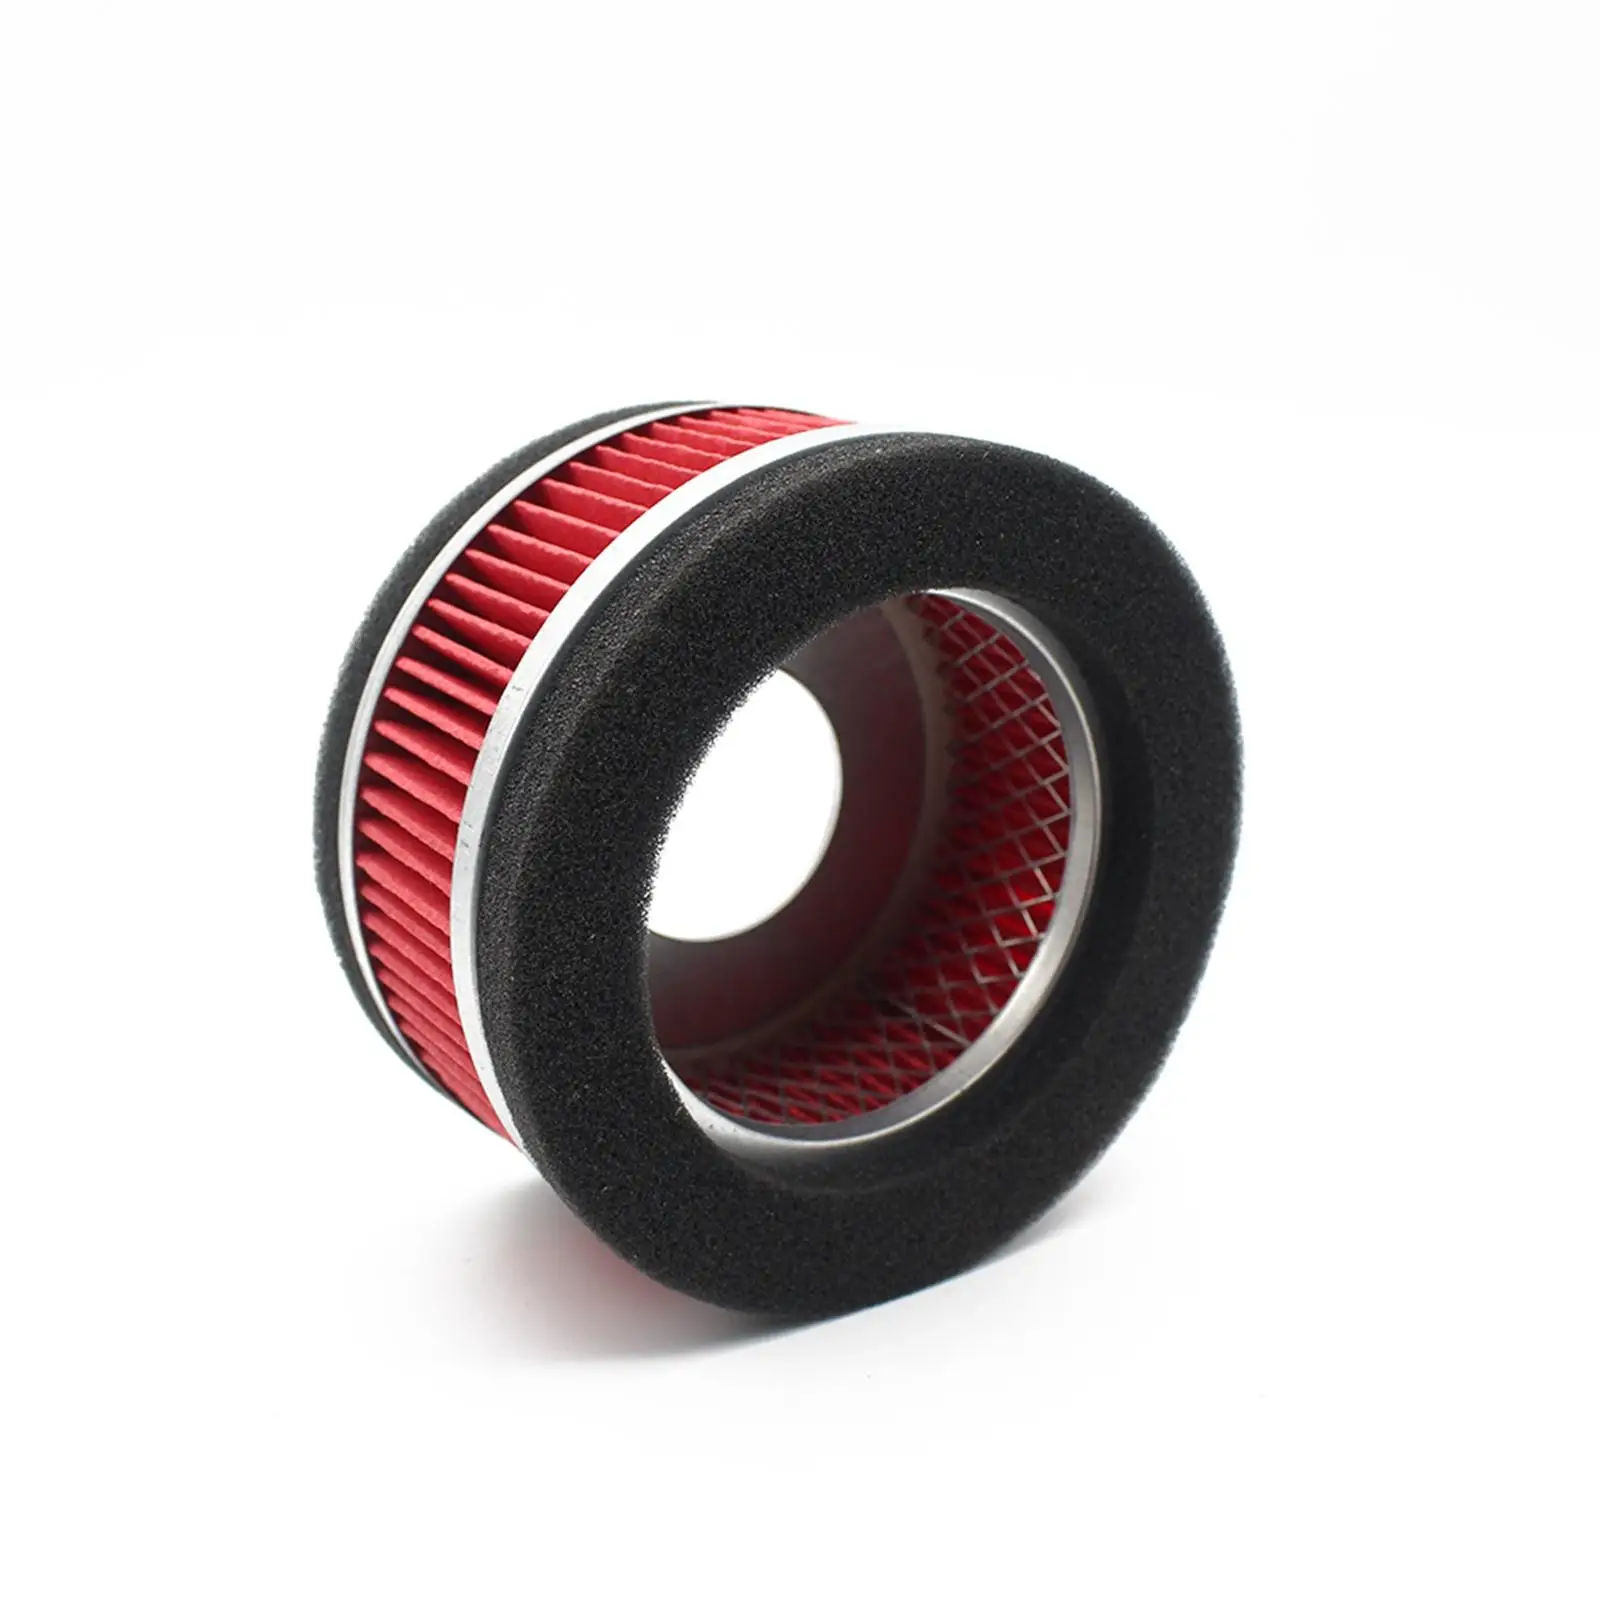 Air Filter Fit for Gy6 125/150cc 4 Stroke Scooters Direct Replaces Repair Spare Parts